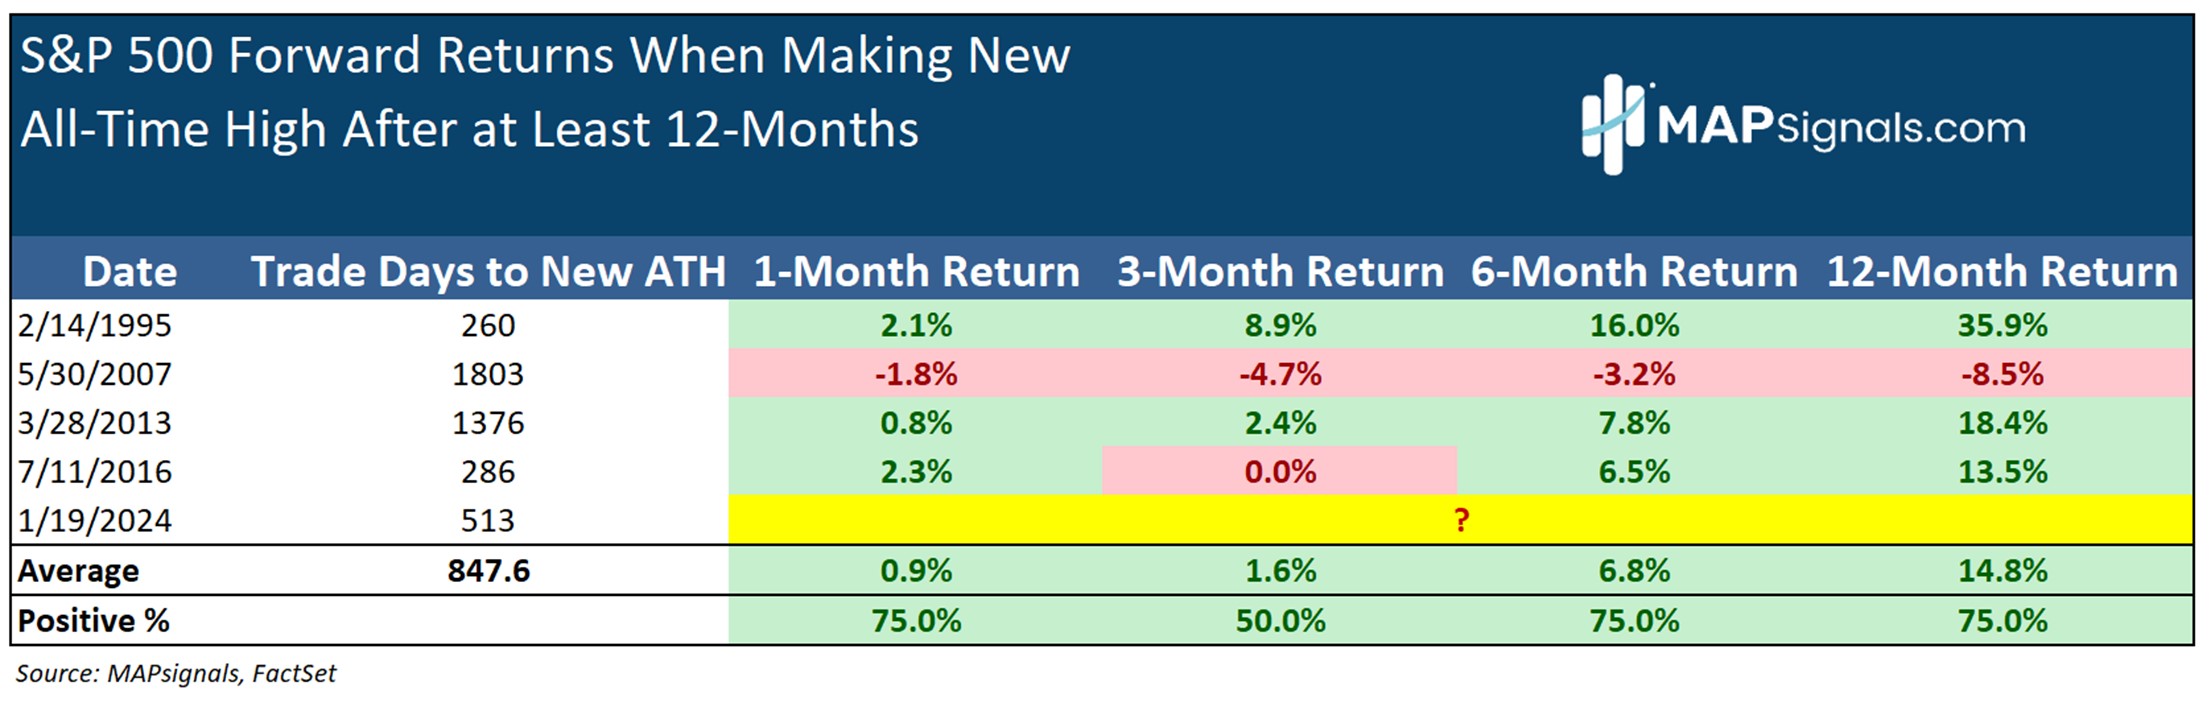 S&P Forward Returns when making New All-Time High after 12M | FactSet | MAPsignals